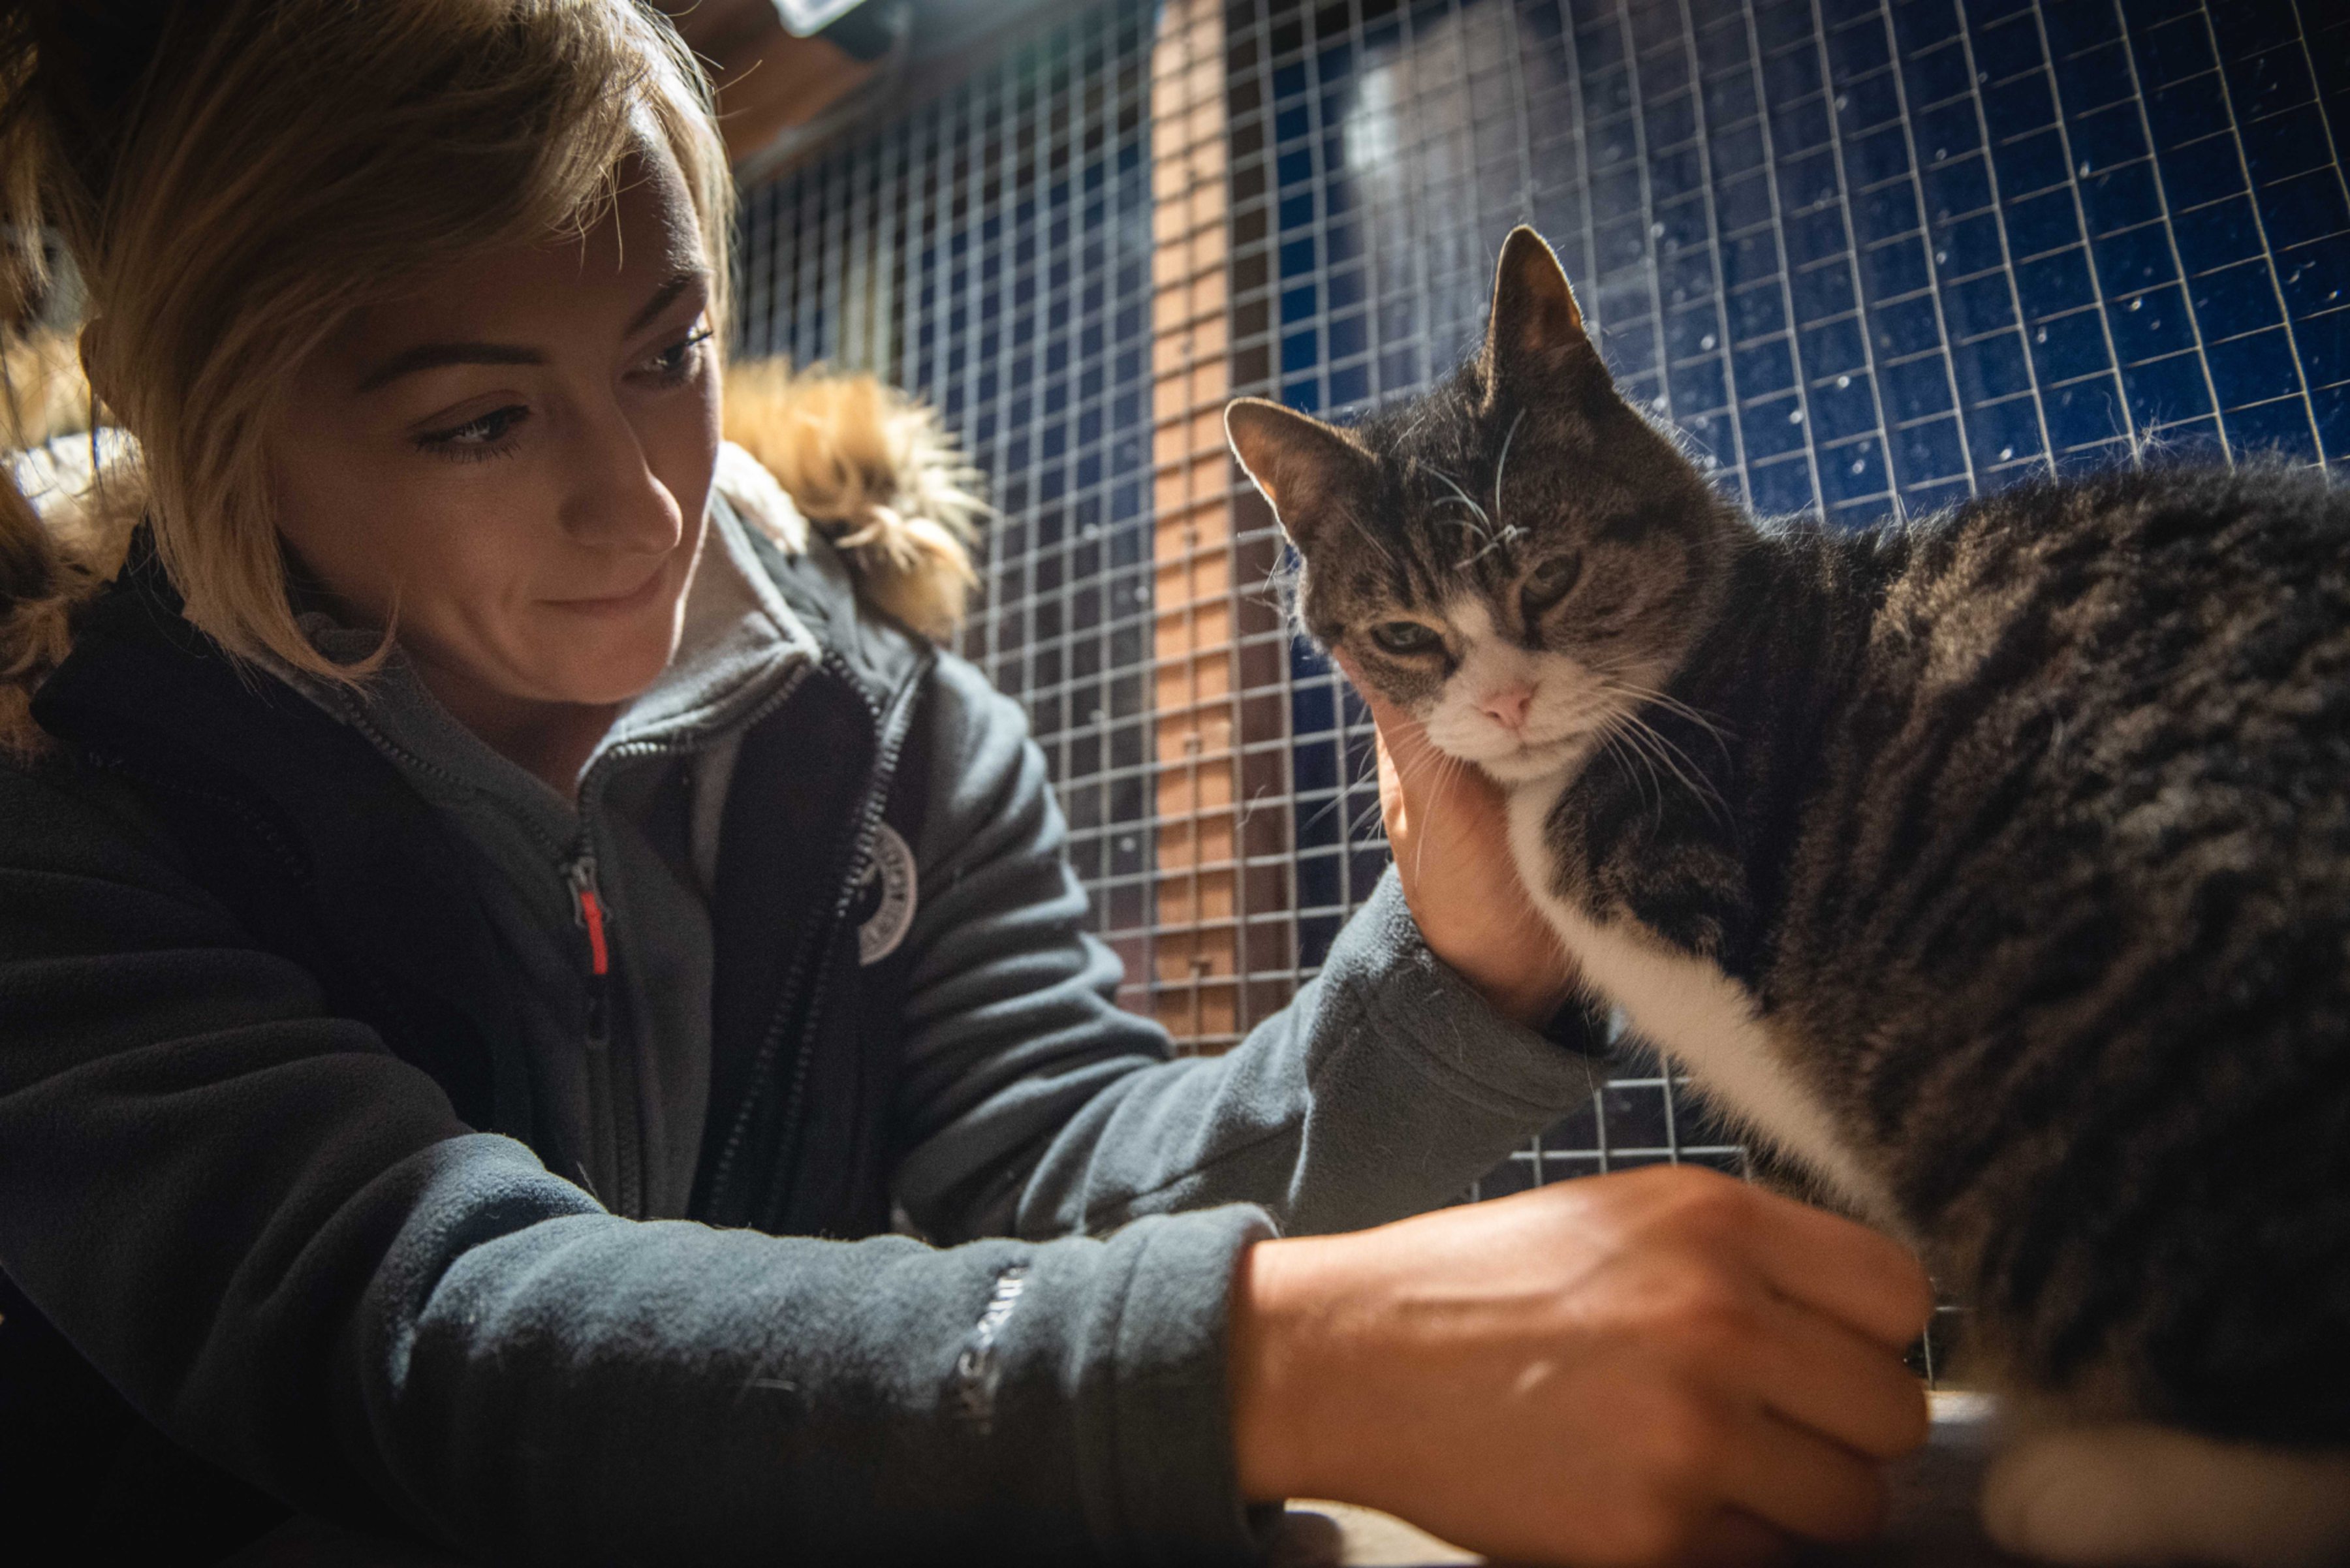 Volunteer Cat Campbell at the animal sanctuary set up after Cats Protection branches were closed in Sandwick, Lewis